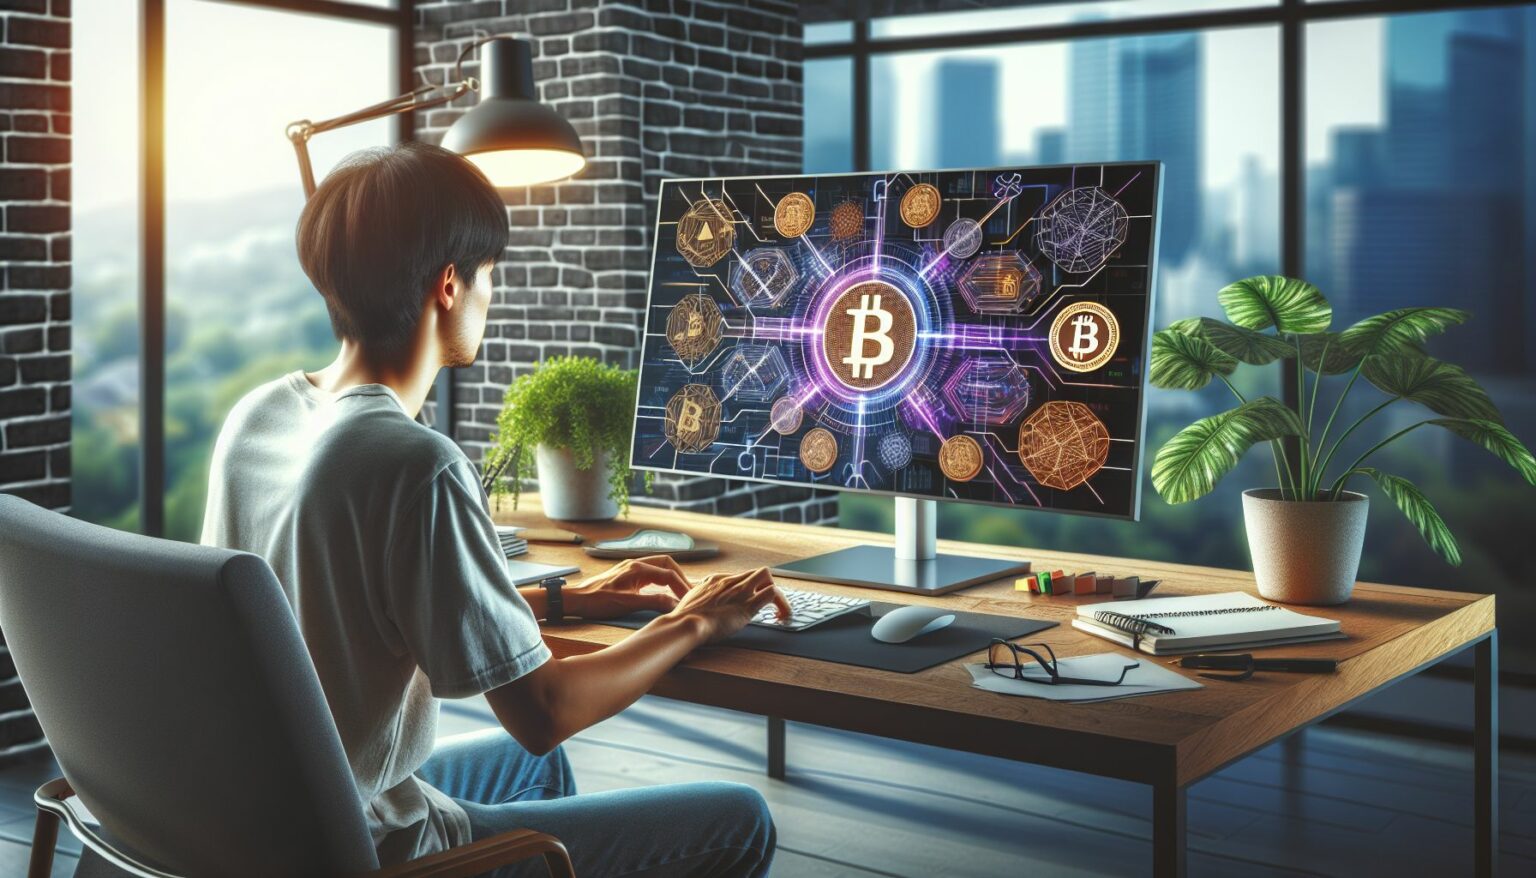 cryptocurrency concept illustration, beginner learning digital currency, person using computer with crypto graphics